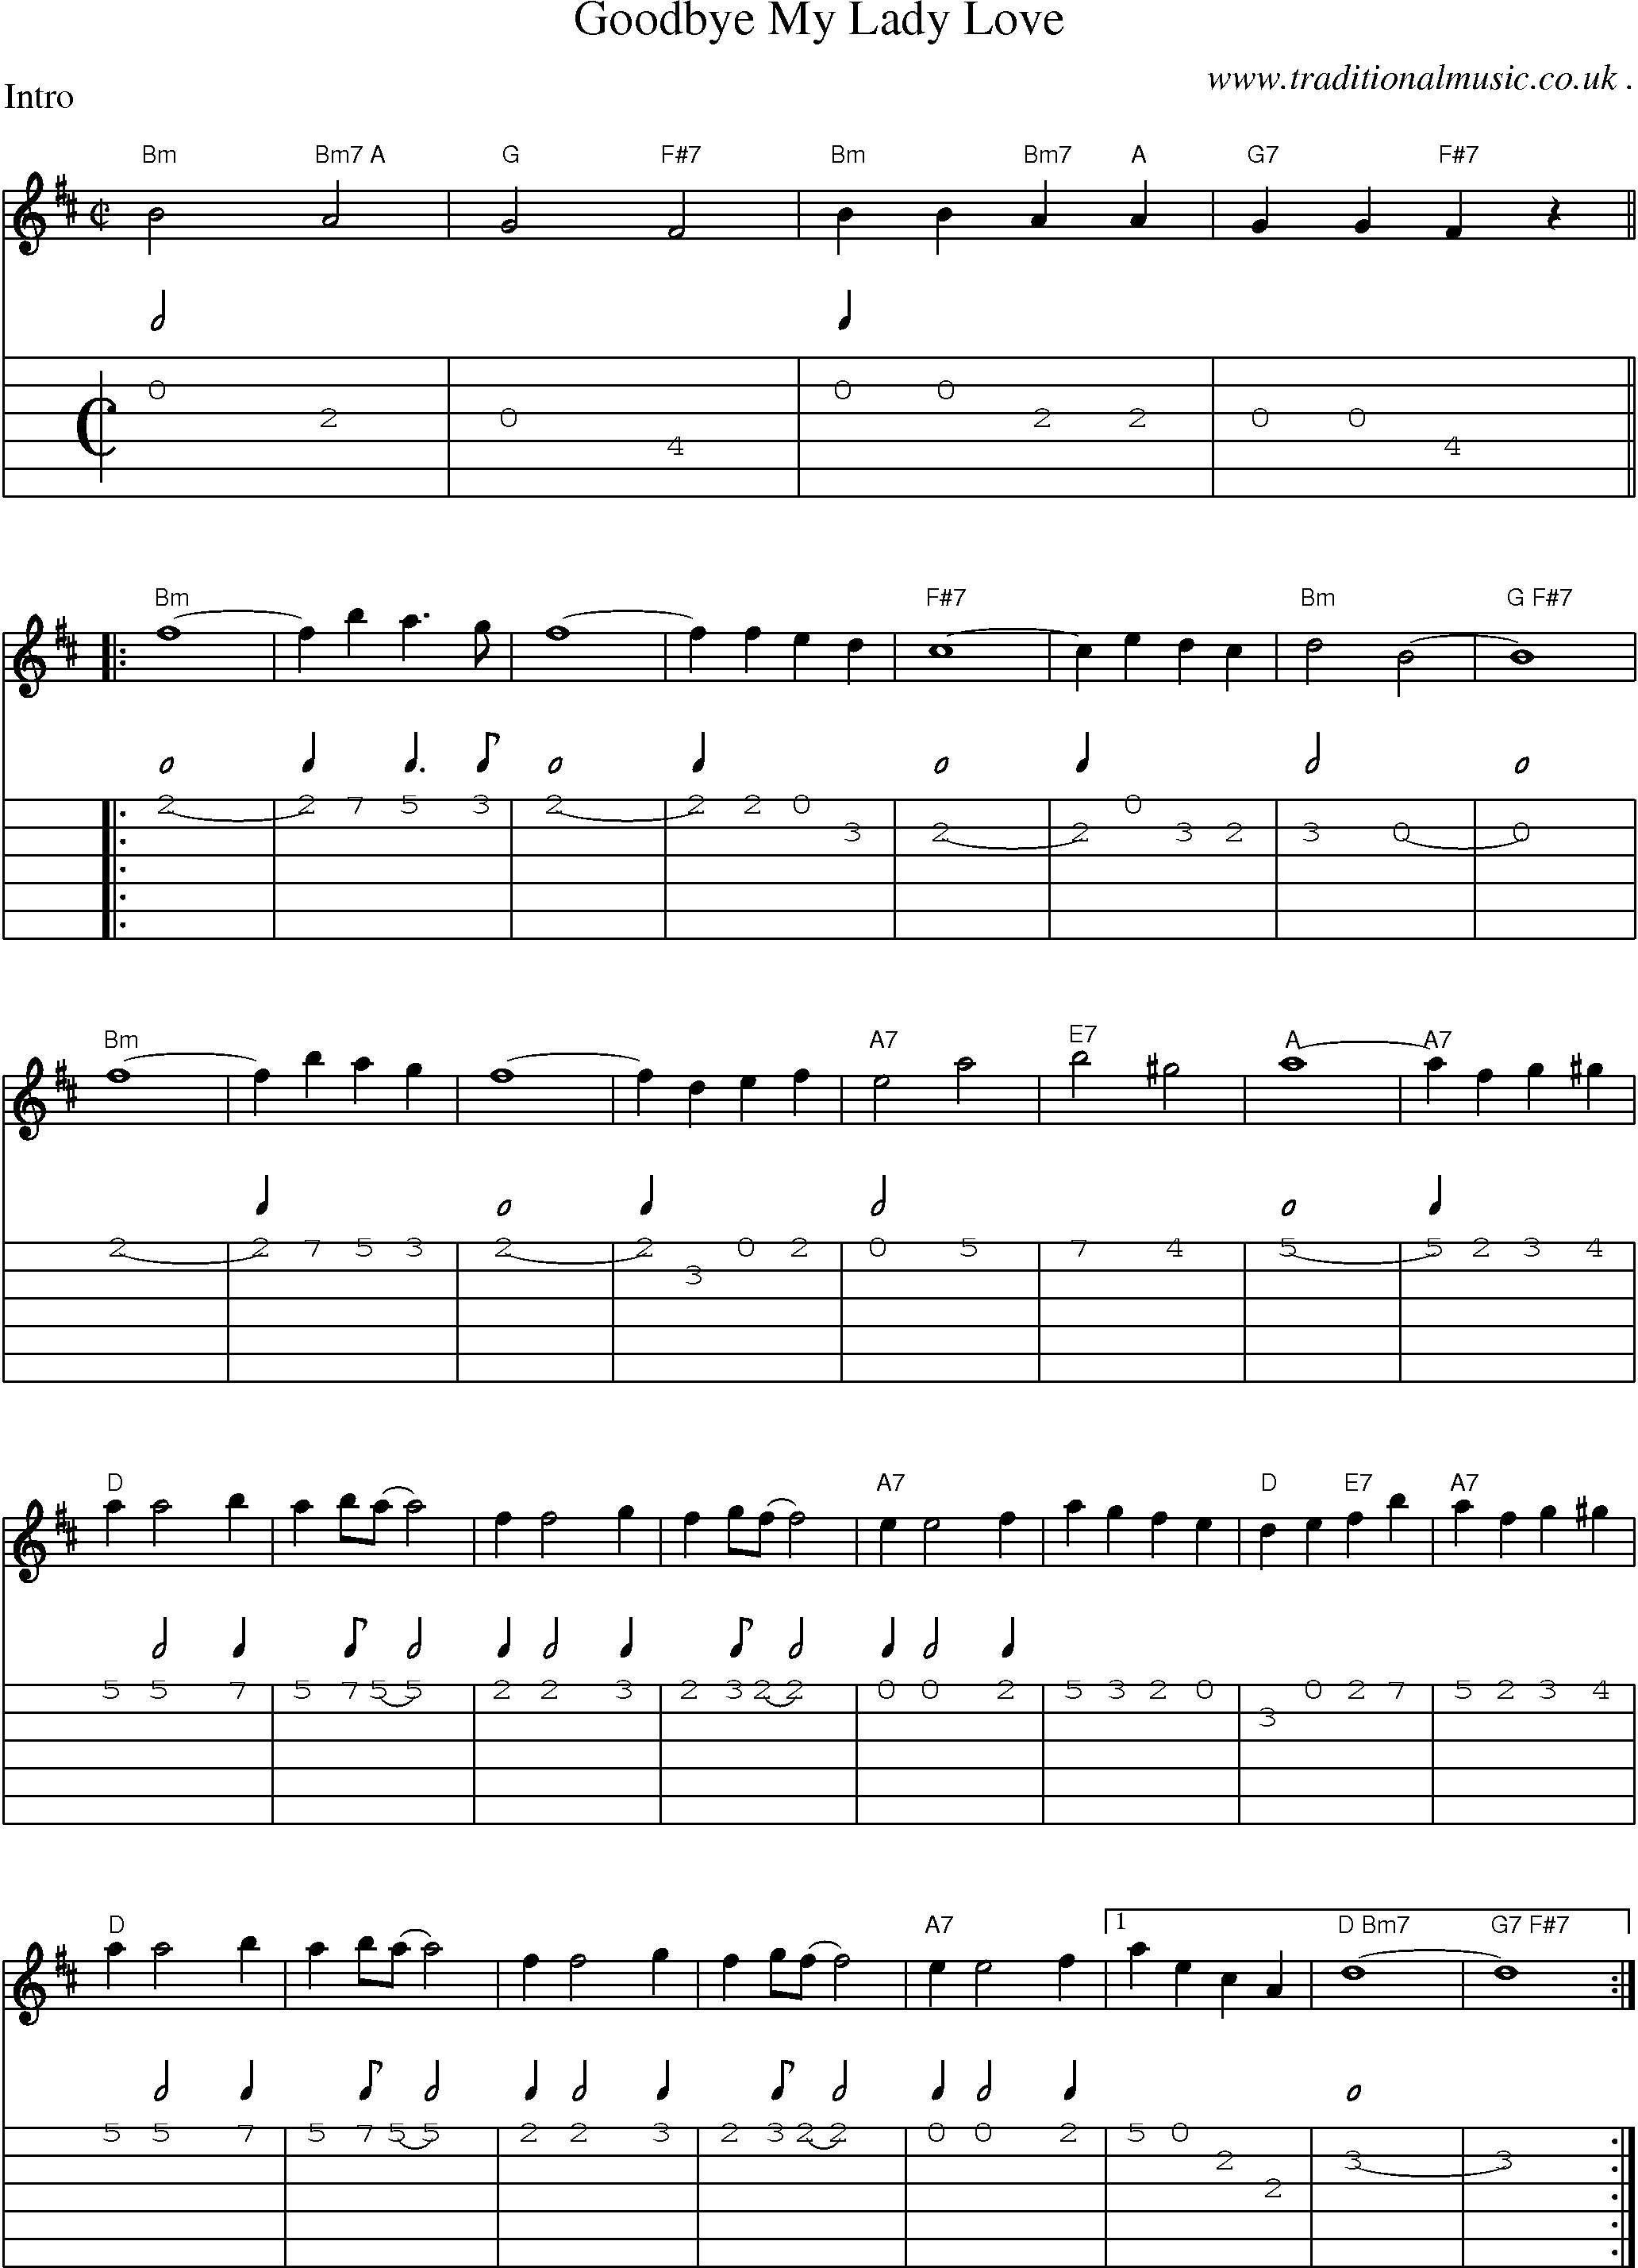 Music Score and Guitar Tabs for Goodbye My Lady Love